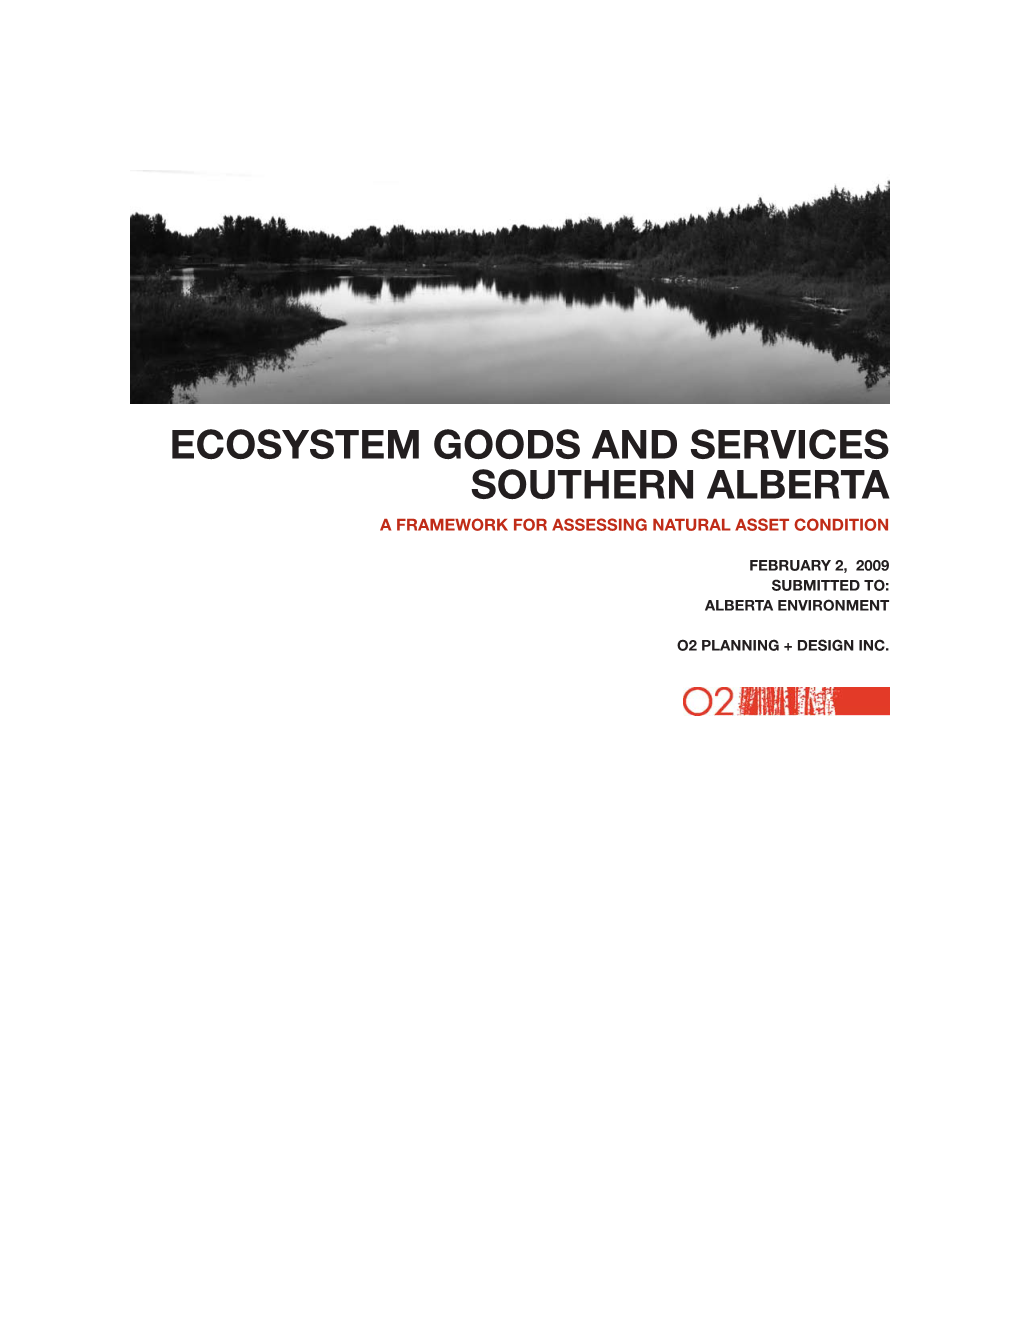 ECOSYSTEM GOODS and SERVICES SOUTHERN ALBERTA a Framework for Assessing NATURAL ASSET CONDITION